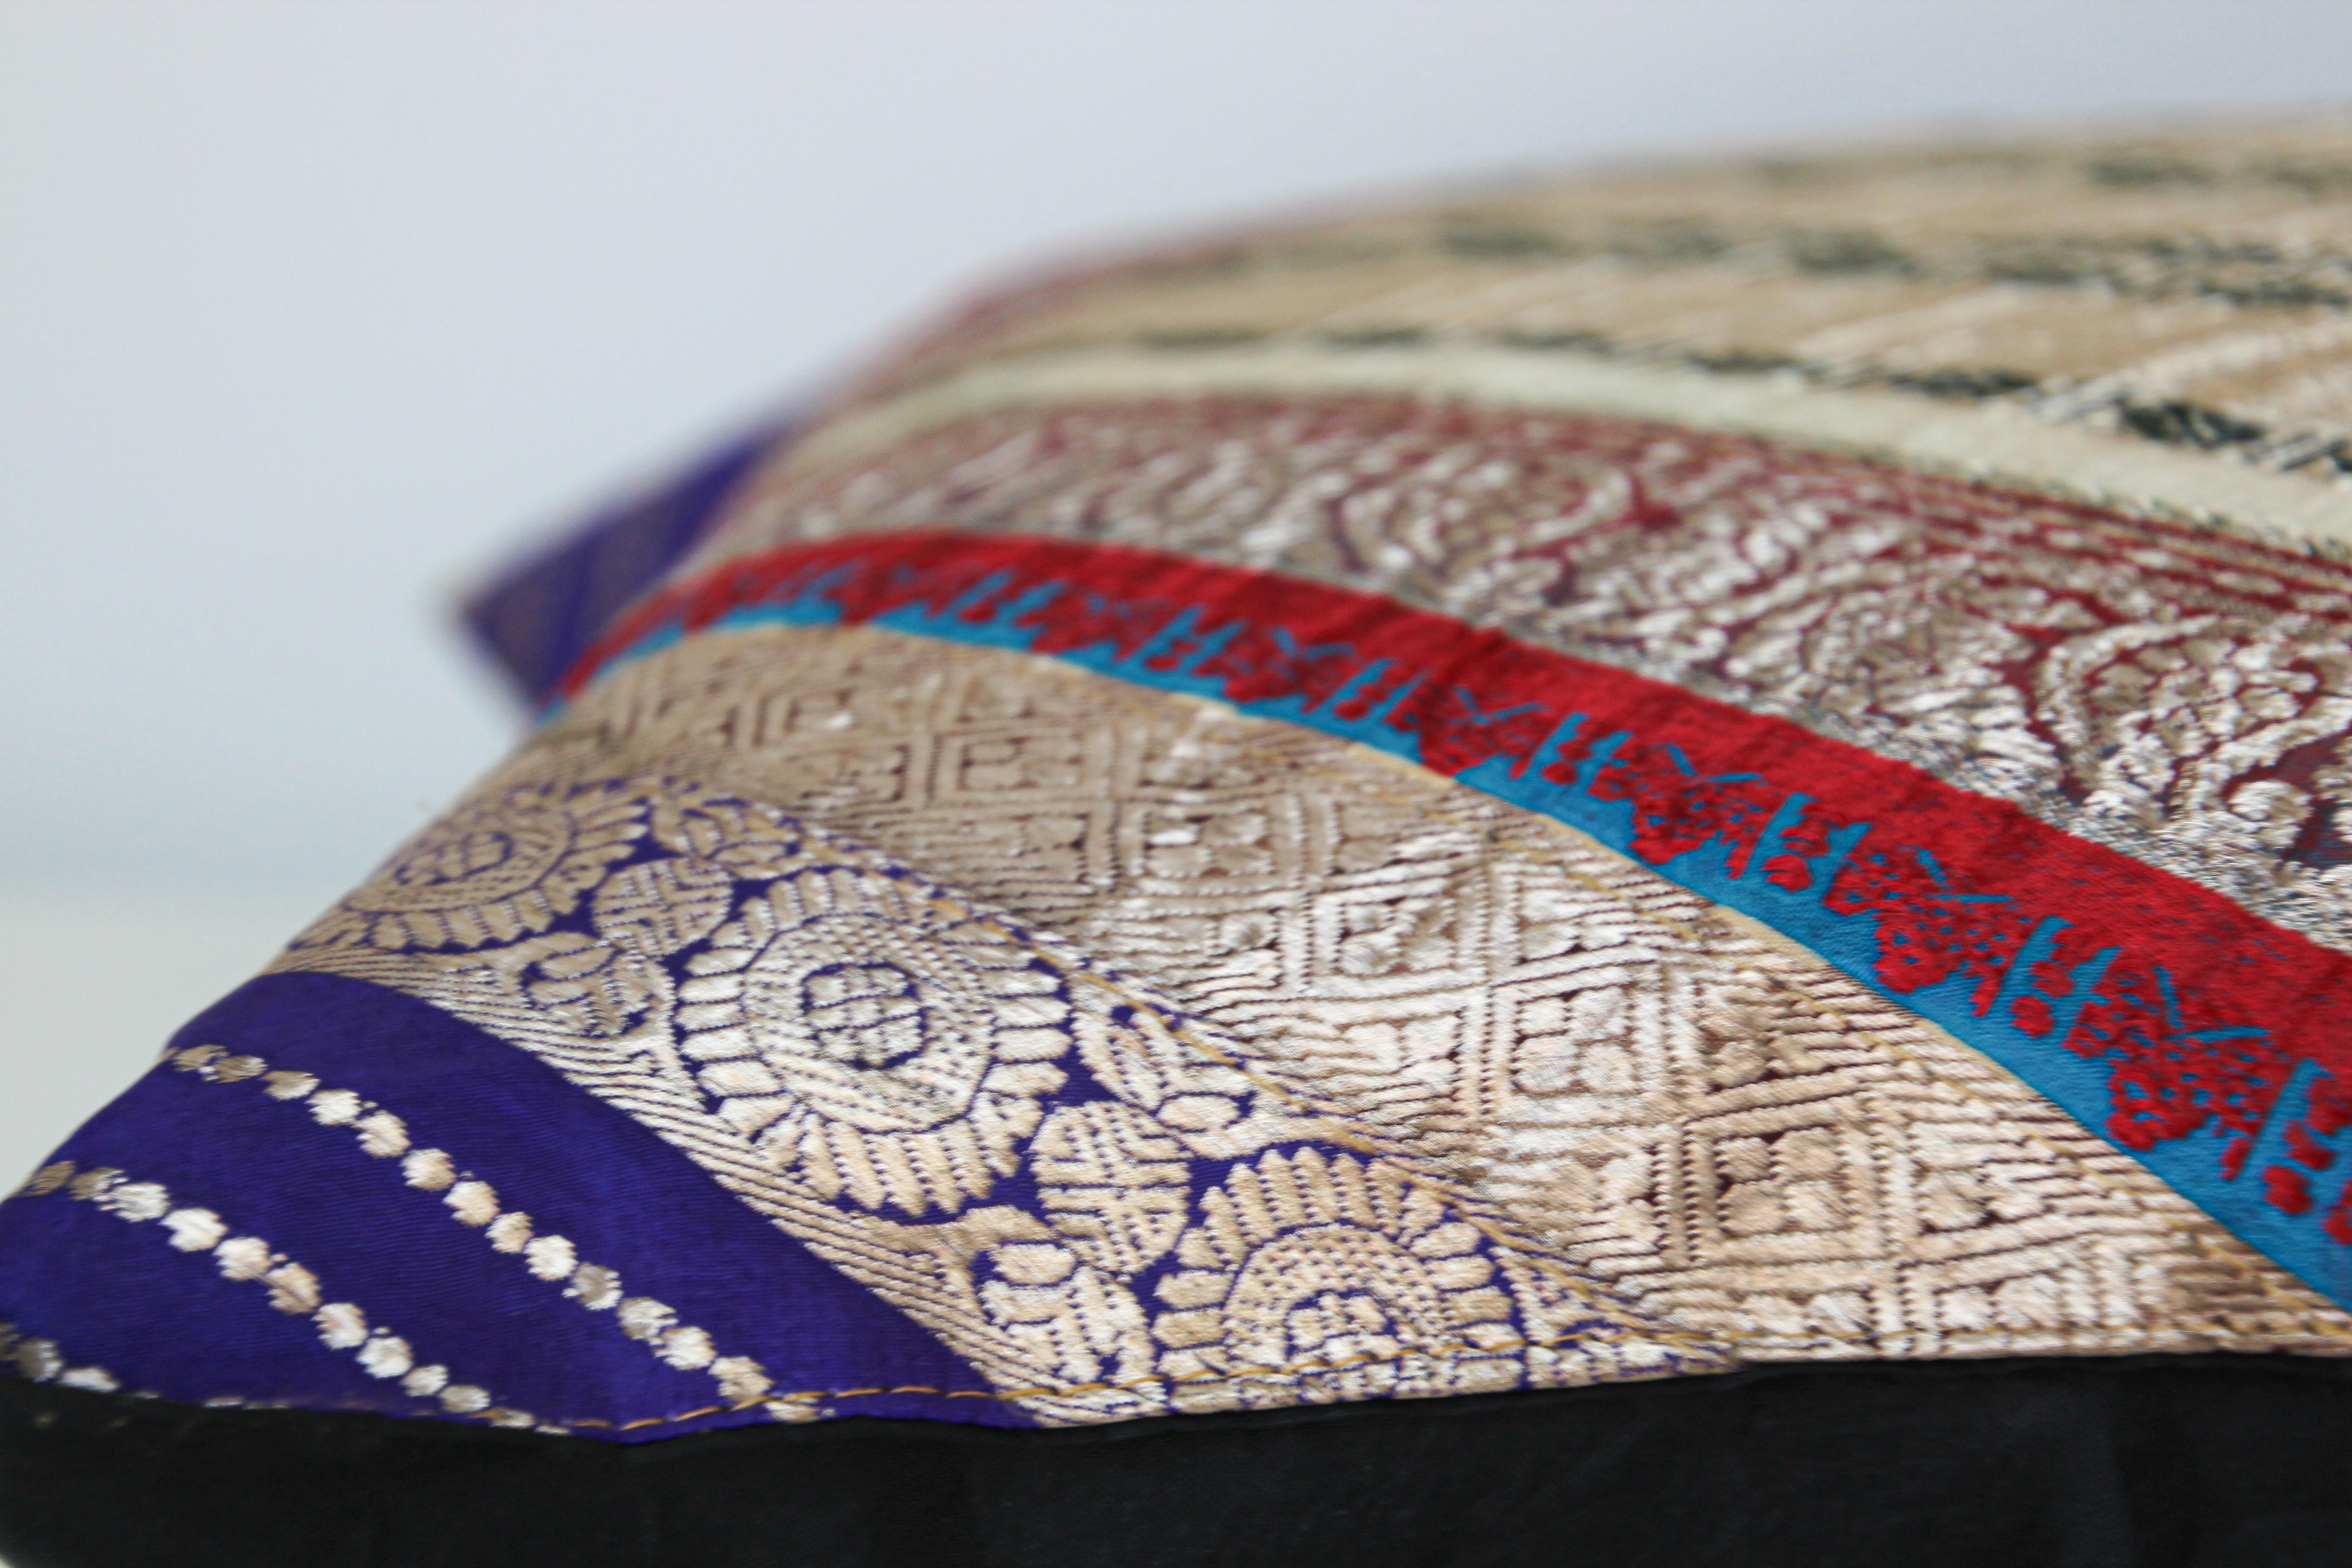 Fabric Decorative Trow Pillow Made from Vintage Sari Borders, India For Sale